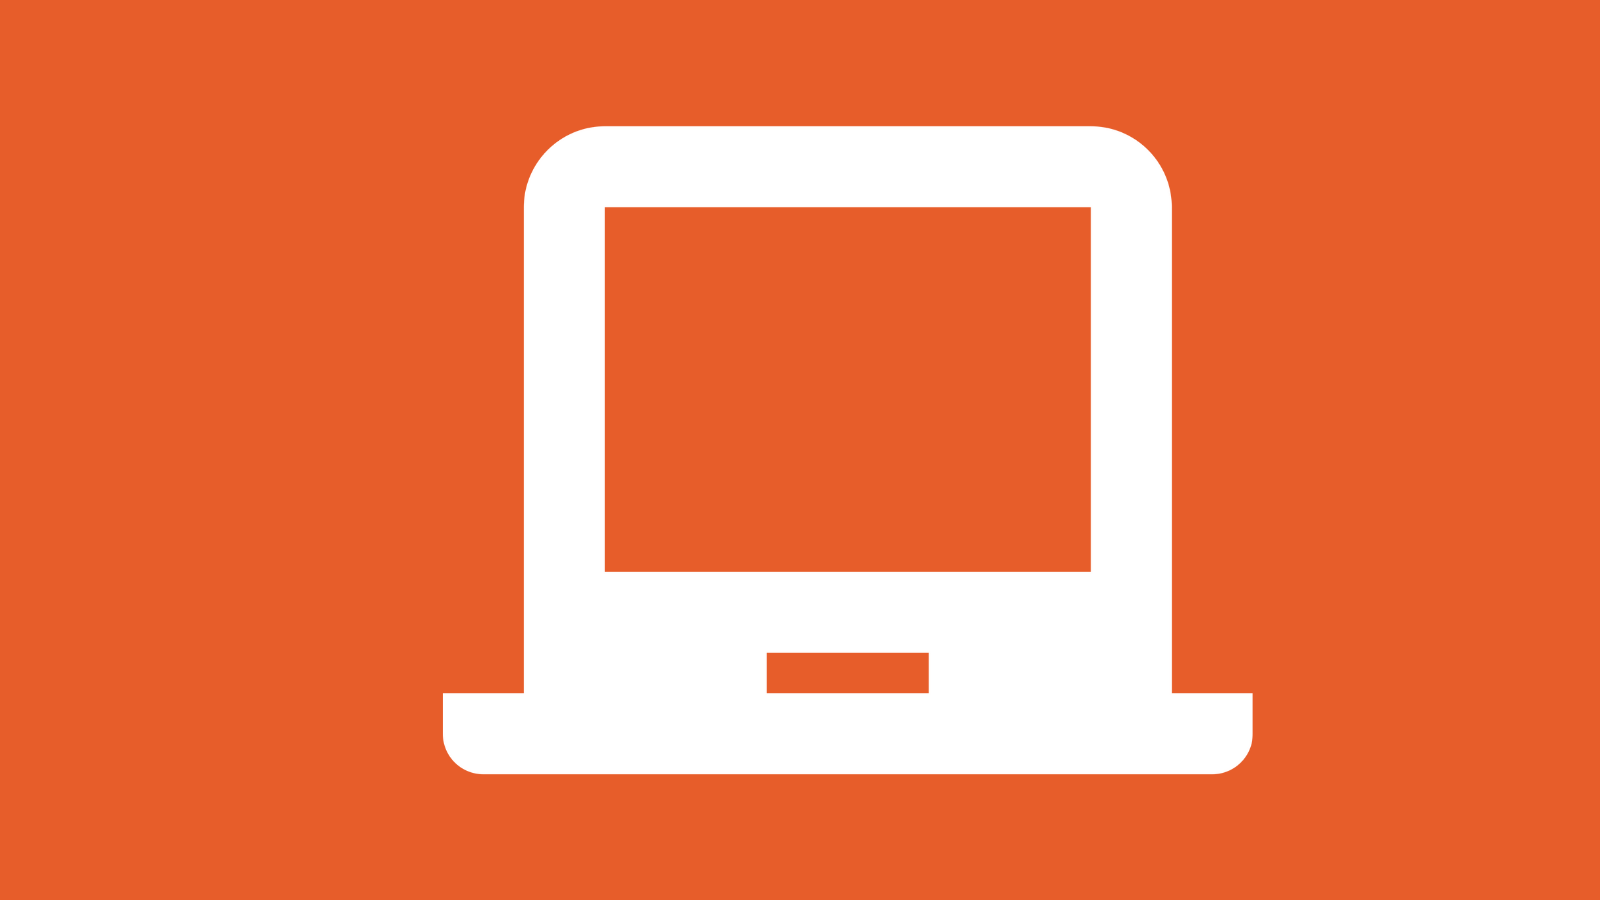 Orange background with white laptop icon in the center.